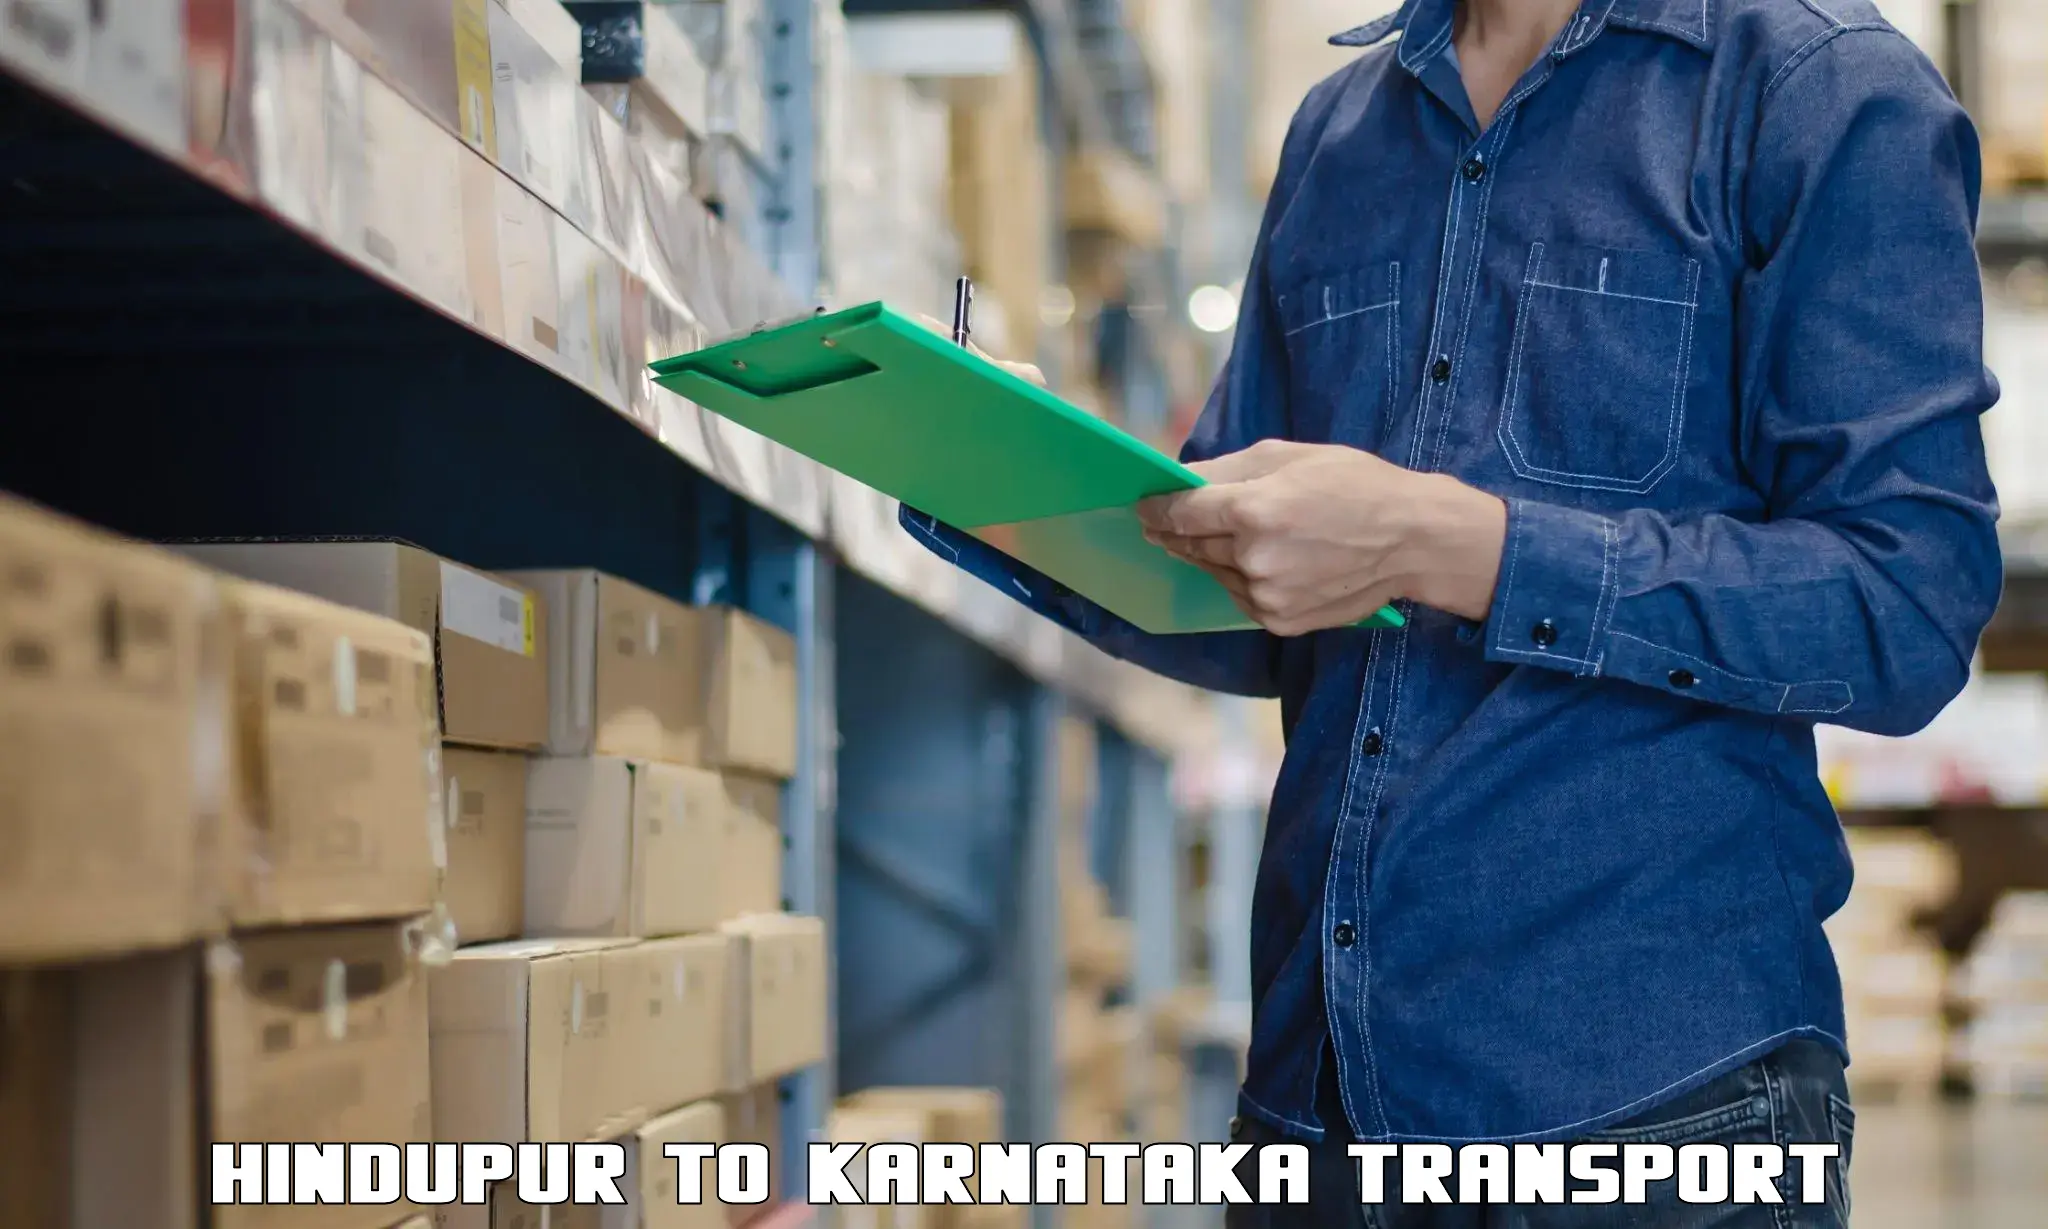 Truck transport companies in India Hindupur to Mangalore